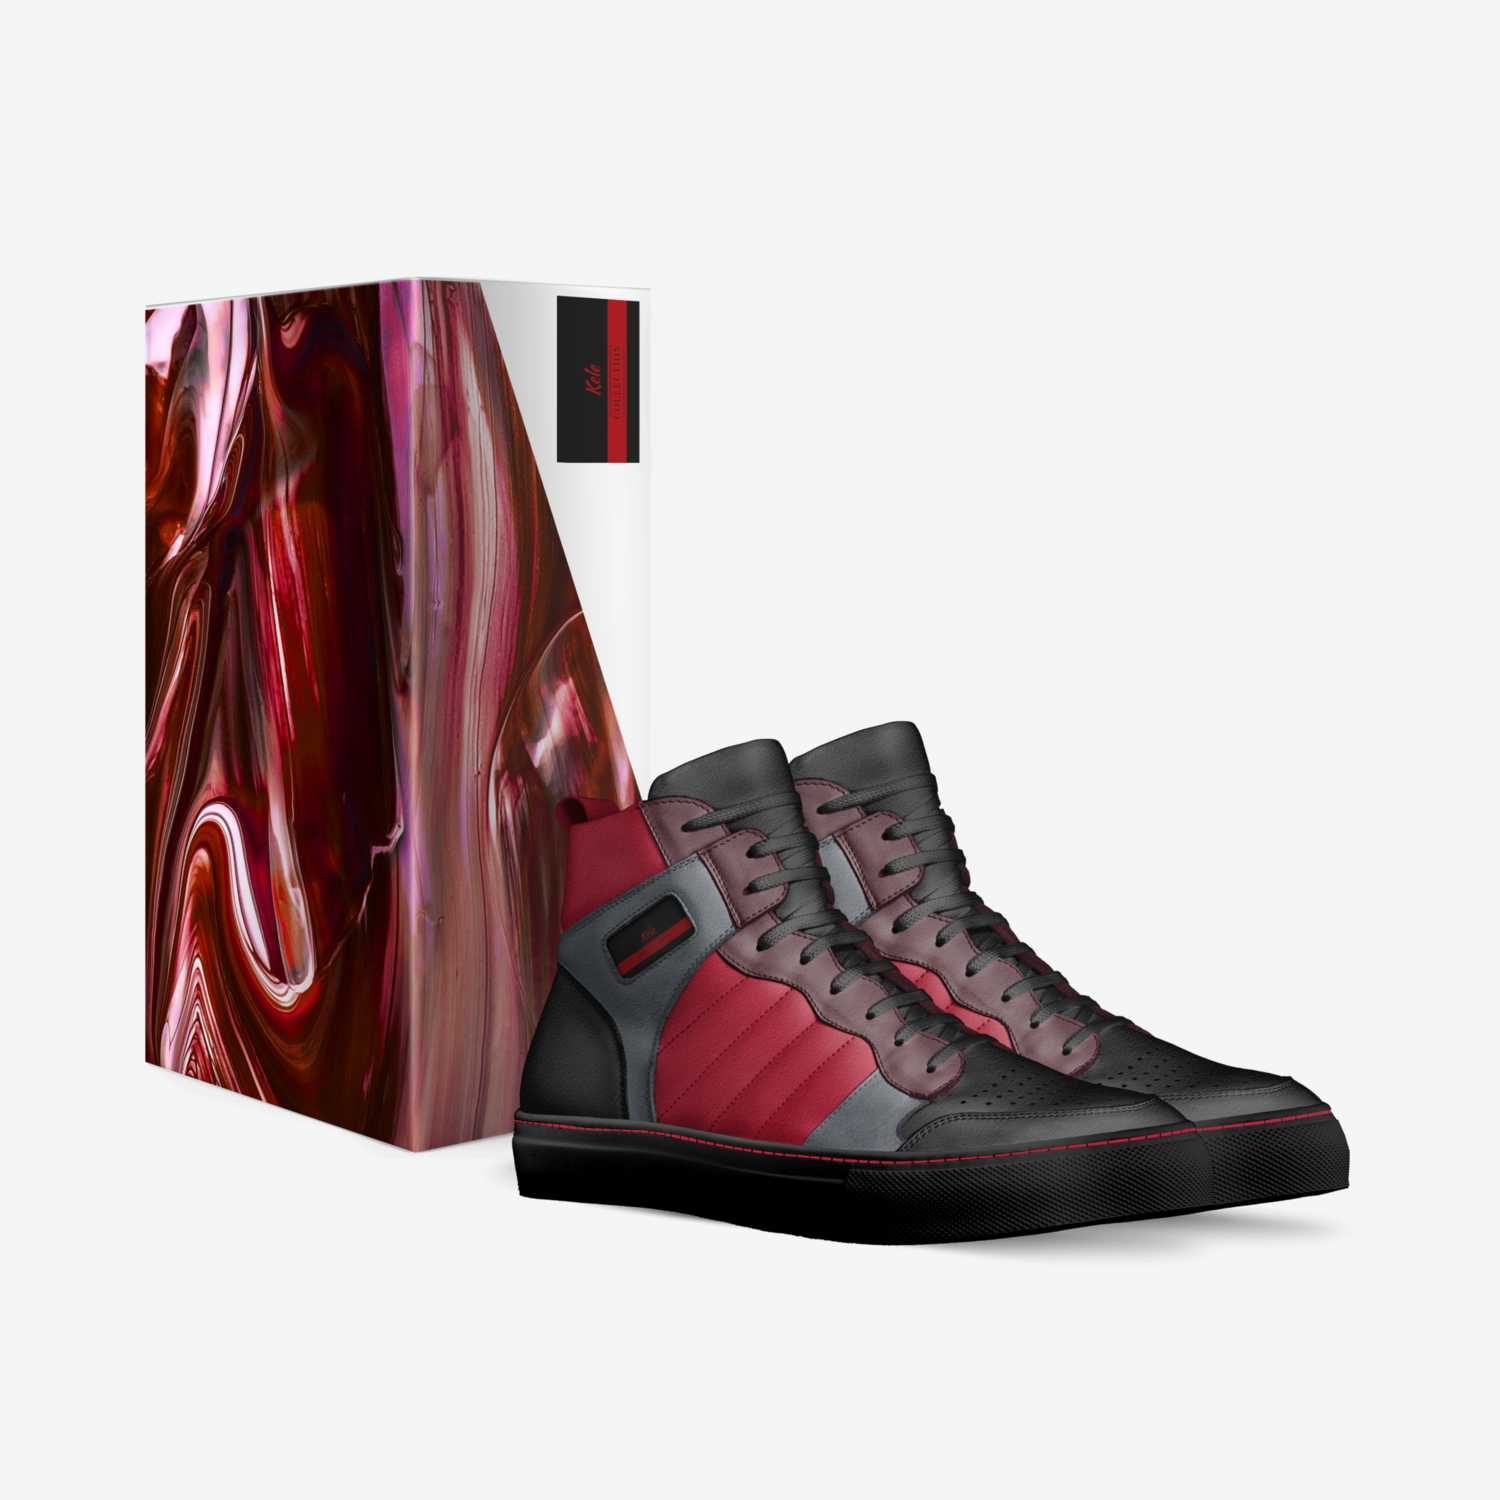 Cherry Drip custom made in Italy shoes by Kay Dyes | Box view